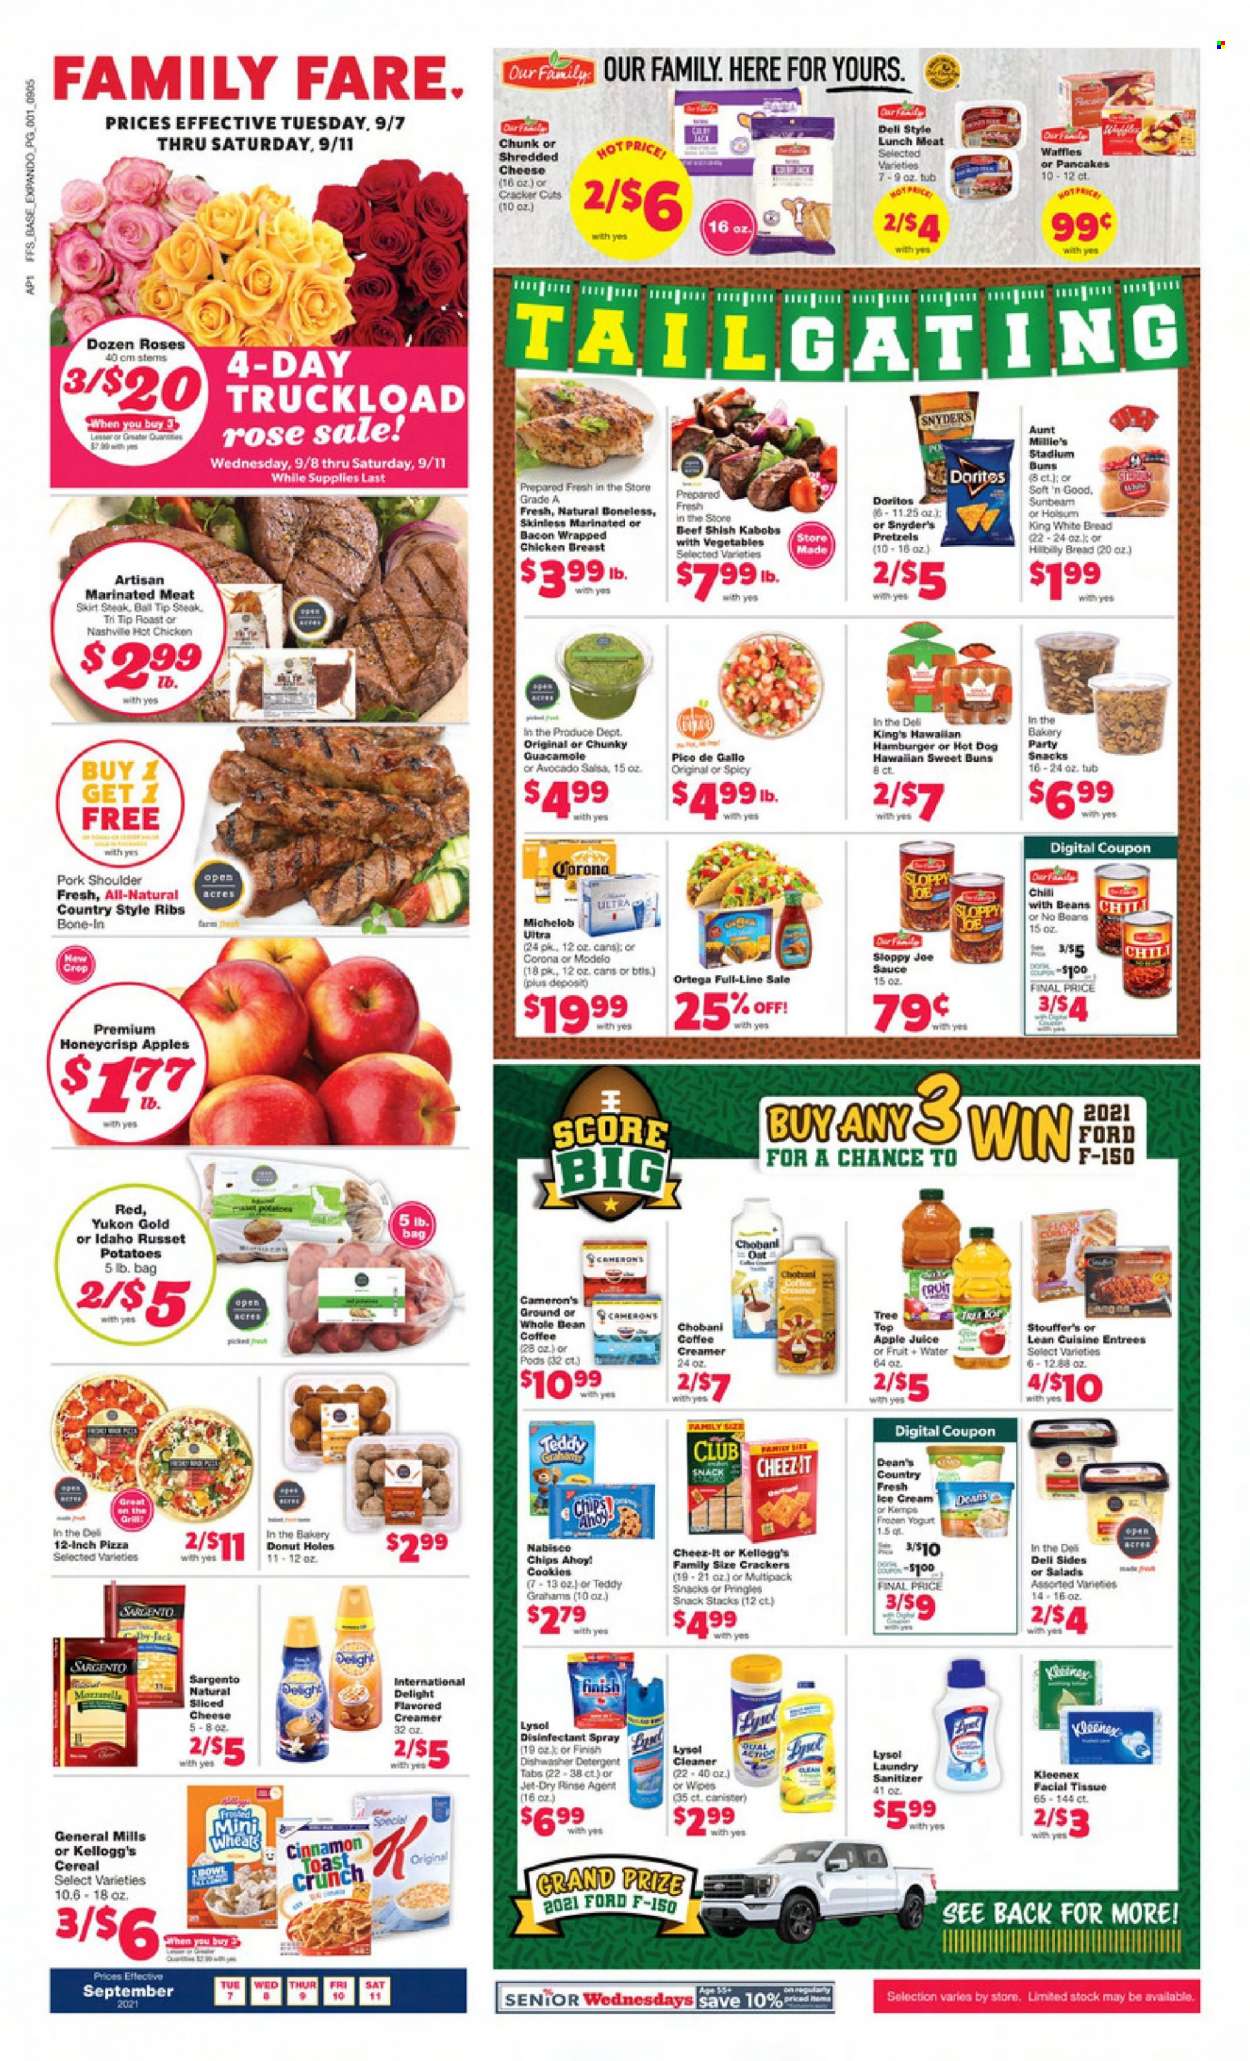 thumbnail - Family Fare Flyer - 09/07/2021 - 09/11/2021 - Sales products - bread, white bread, pretzels, buns, donut holes, russet potatoes, potatoes, hot dog, pizza, hamburger, sauce, Lean Cuisine, bacon, guacamole, lunch meat, shredded cheese, sliced cheese, Kemps, Sargento, Chobani, creamer, Stouffer's, cookies, snack, crackers, Kellogg's, Chips Ahoy!, Doritos, Pringles, chips, oats, cereals, cinnamon, salsa, apple juice, juice, coffee, rosé wine, beer, Corona Extra, Modelo, chicken breasts, steak, pork meat, pork ribs, pork shoulder, country style ribs, Kleenex, tissues, detergent, cleaner, desinfection, Lysol, Jet, antibacterial spray, canister, Sunbeam, rose, Michelob. Page 1.